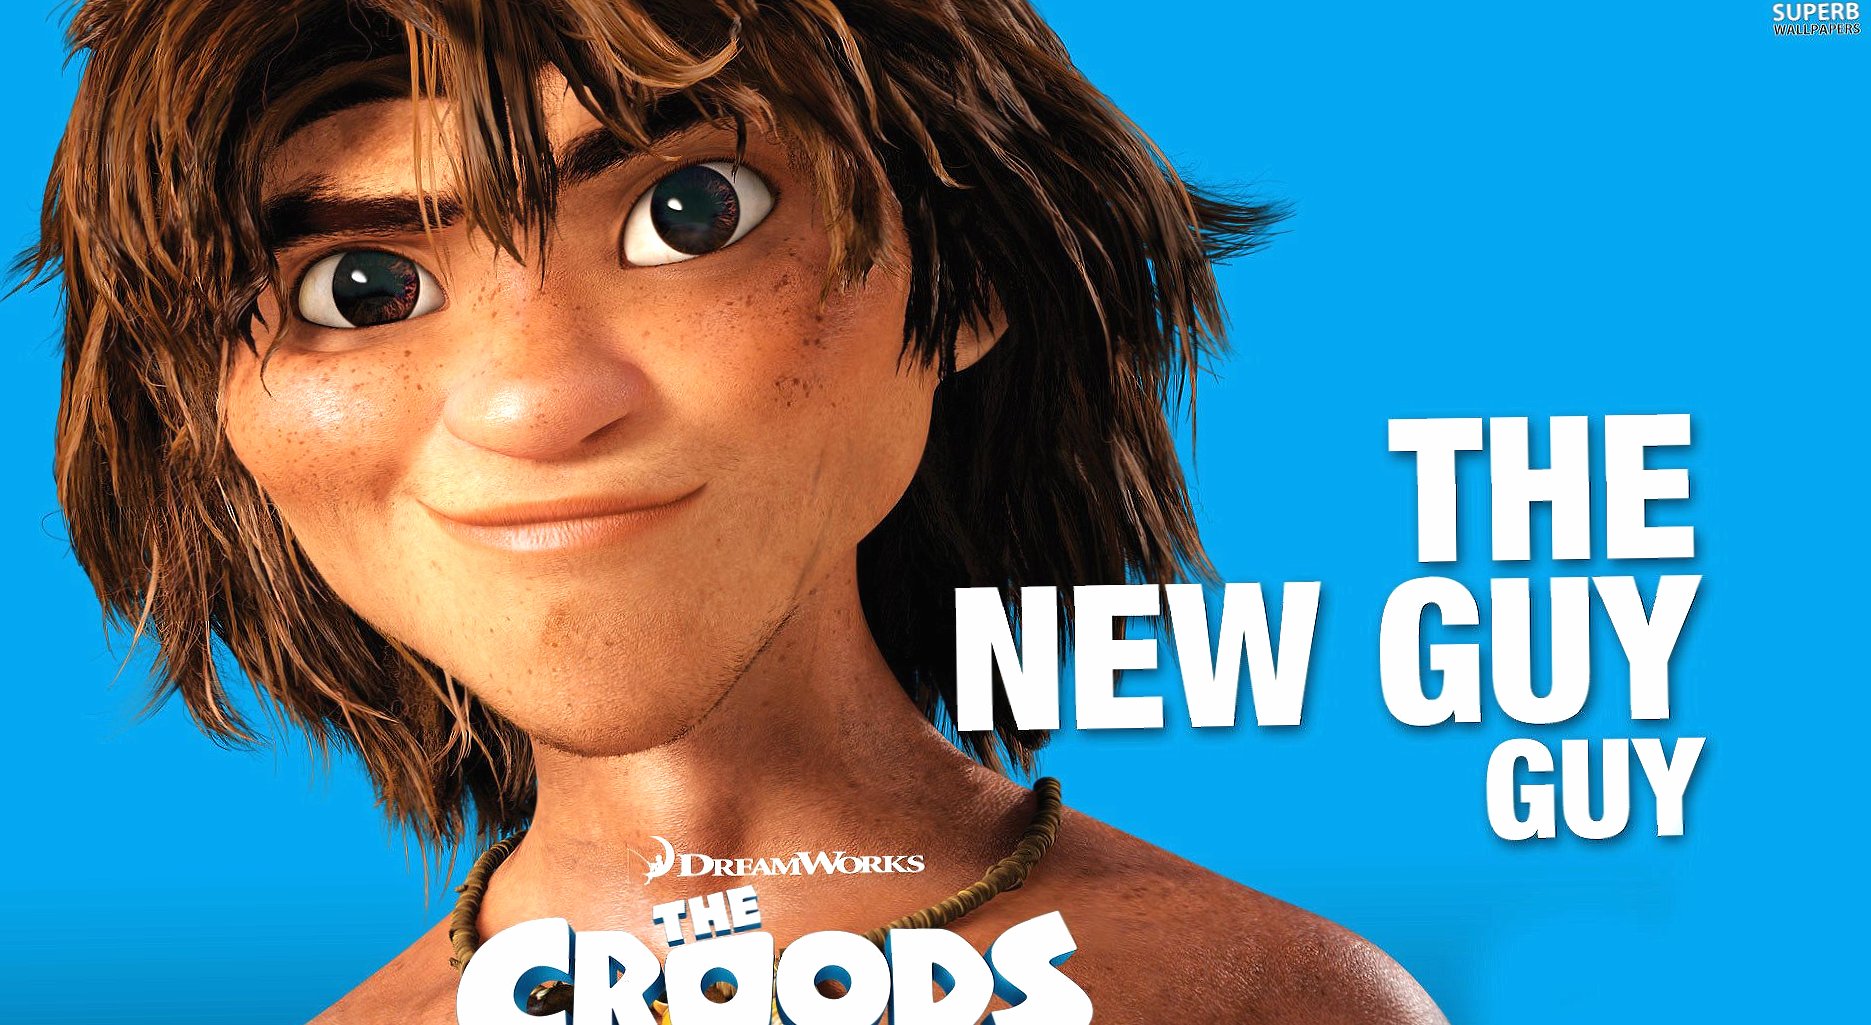 The croods guy wallpapers HD quality